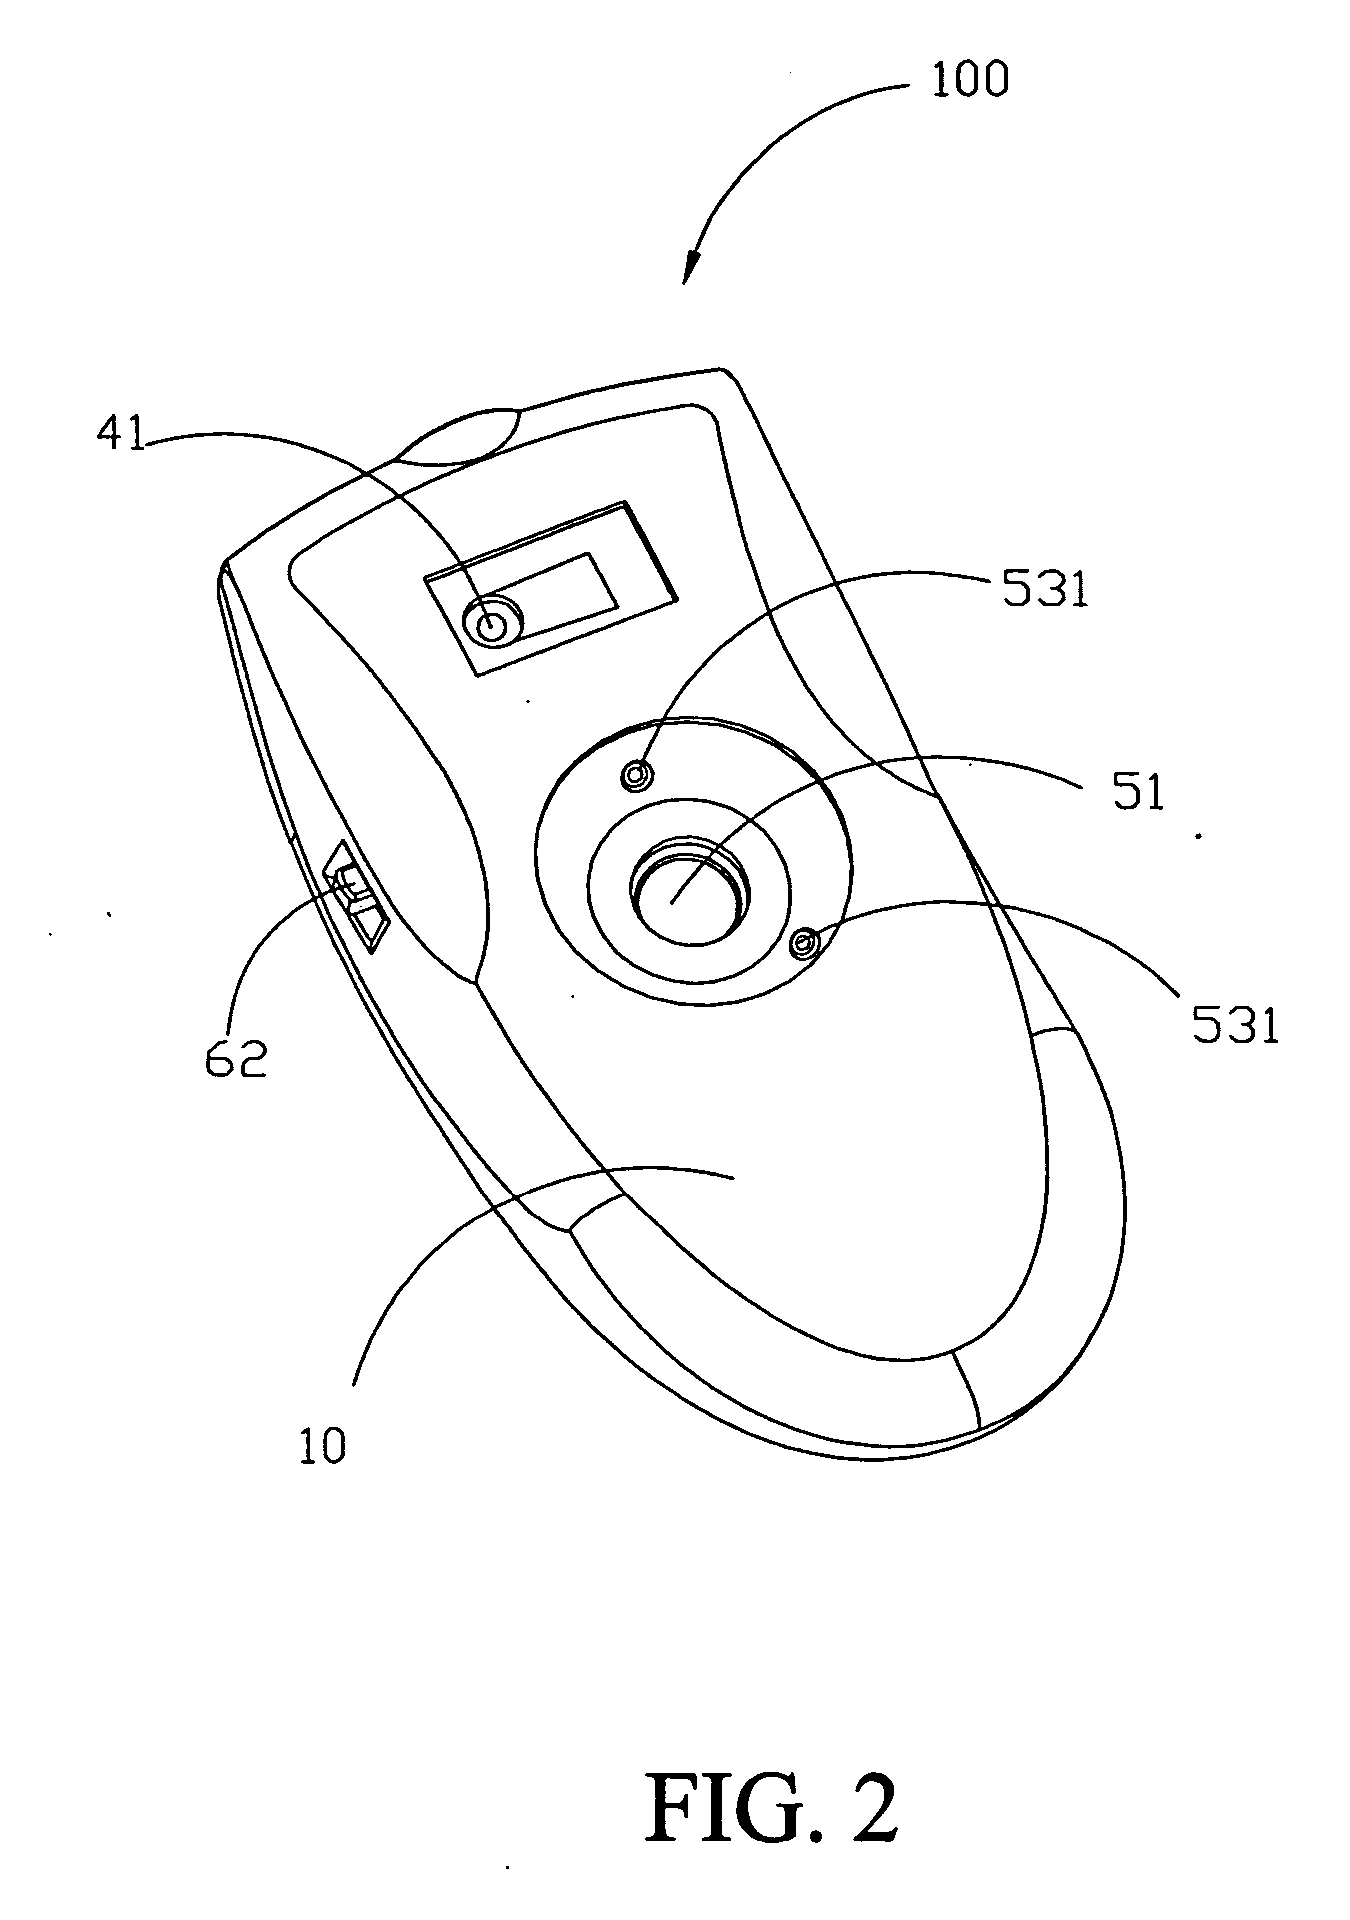 Mouse with image system and method for using the same